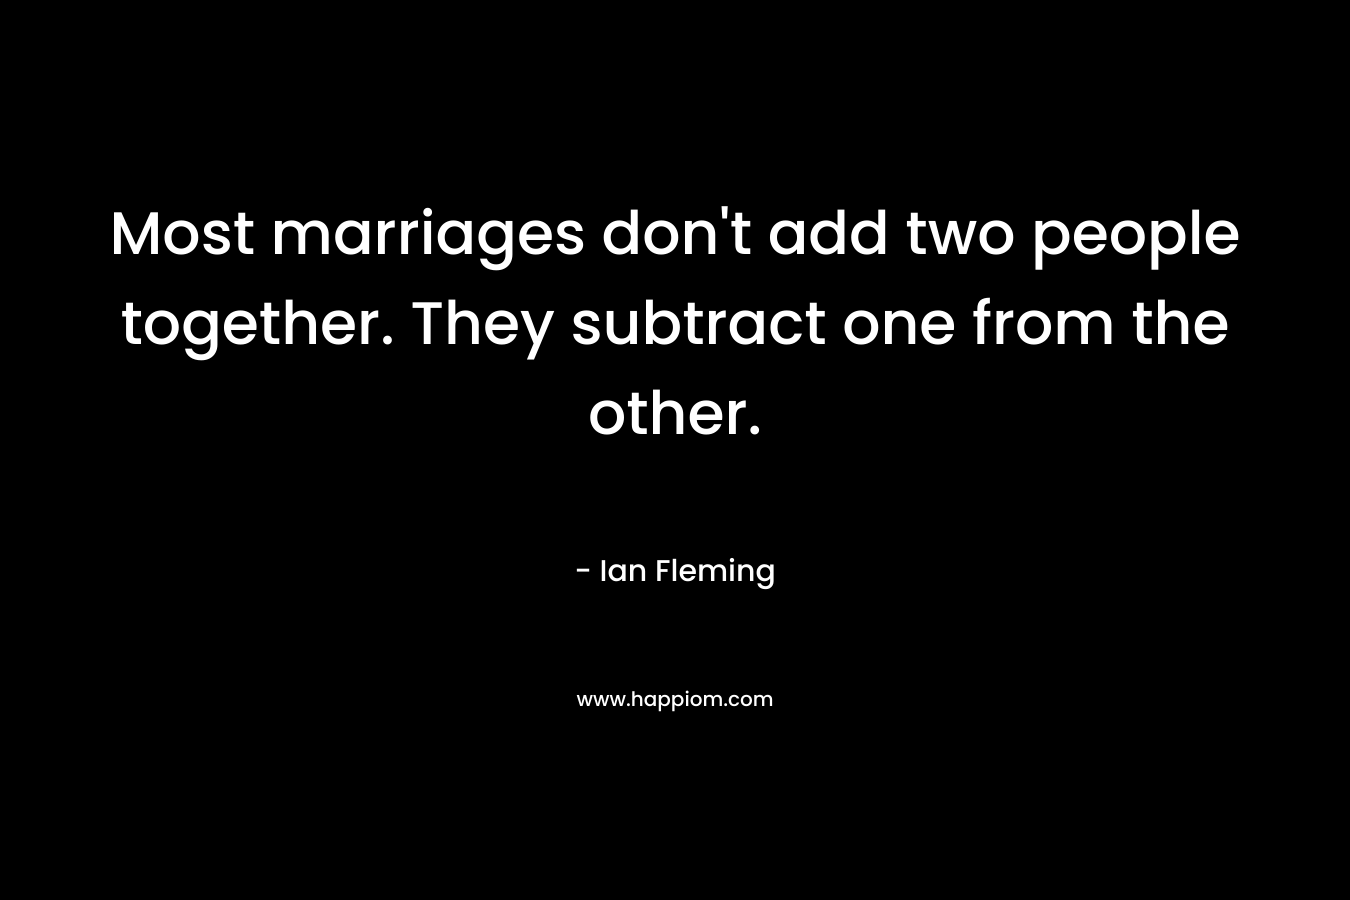 Most marriages don’t add two people together. They subtract one from the other. – Ian Fleming